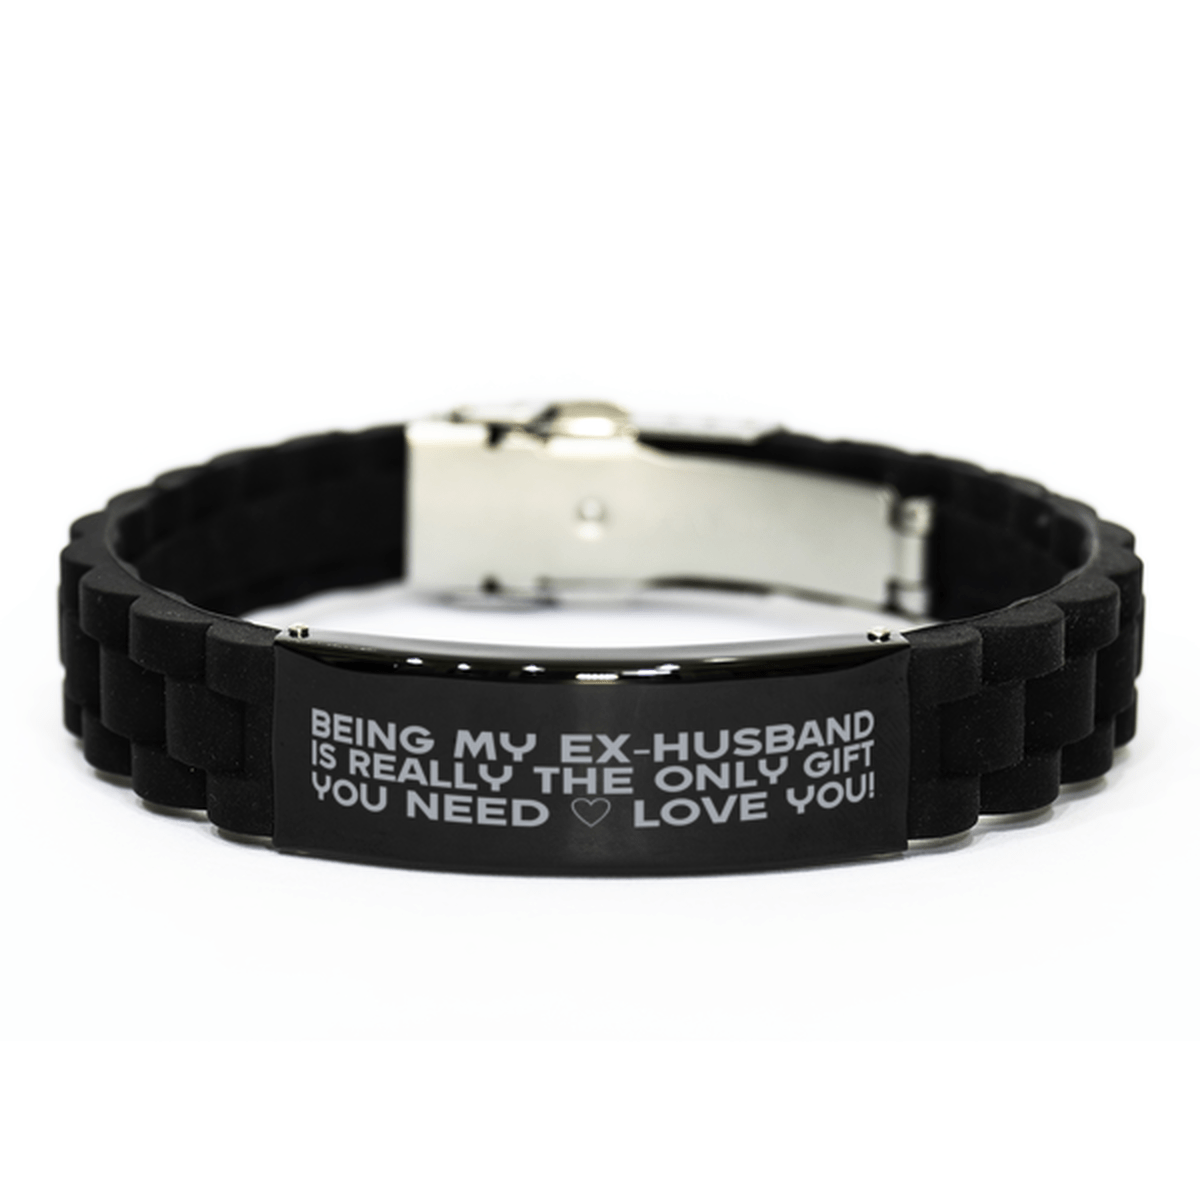 Funny Ex-husband Bracelet, Being My Ex-husband Is Really the Only Gift You Need, Best Birthday Gifts for Ex-husband